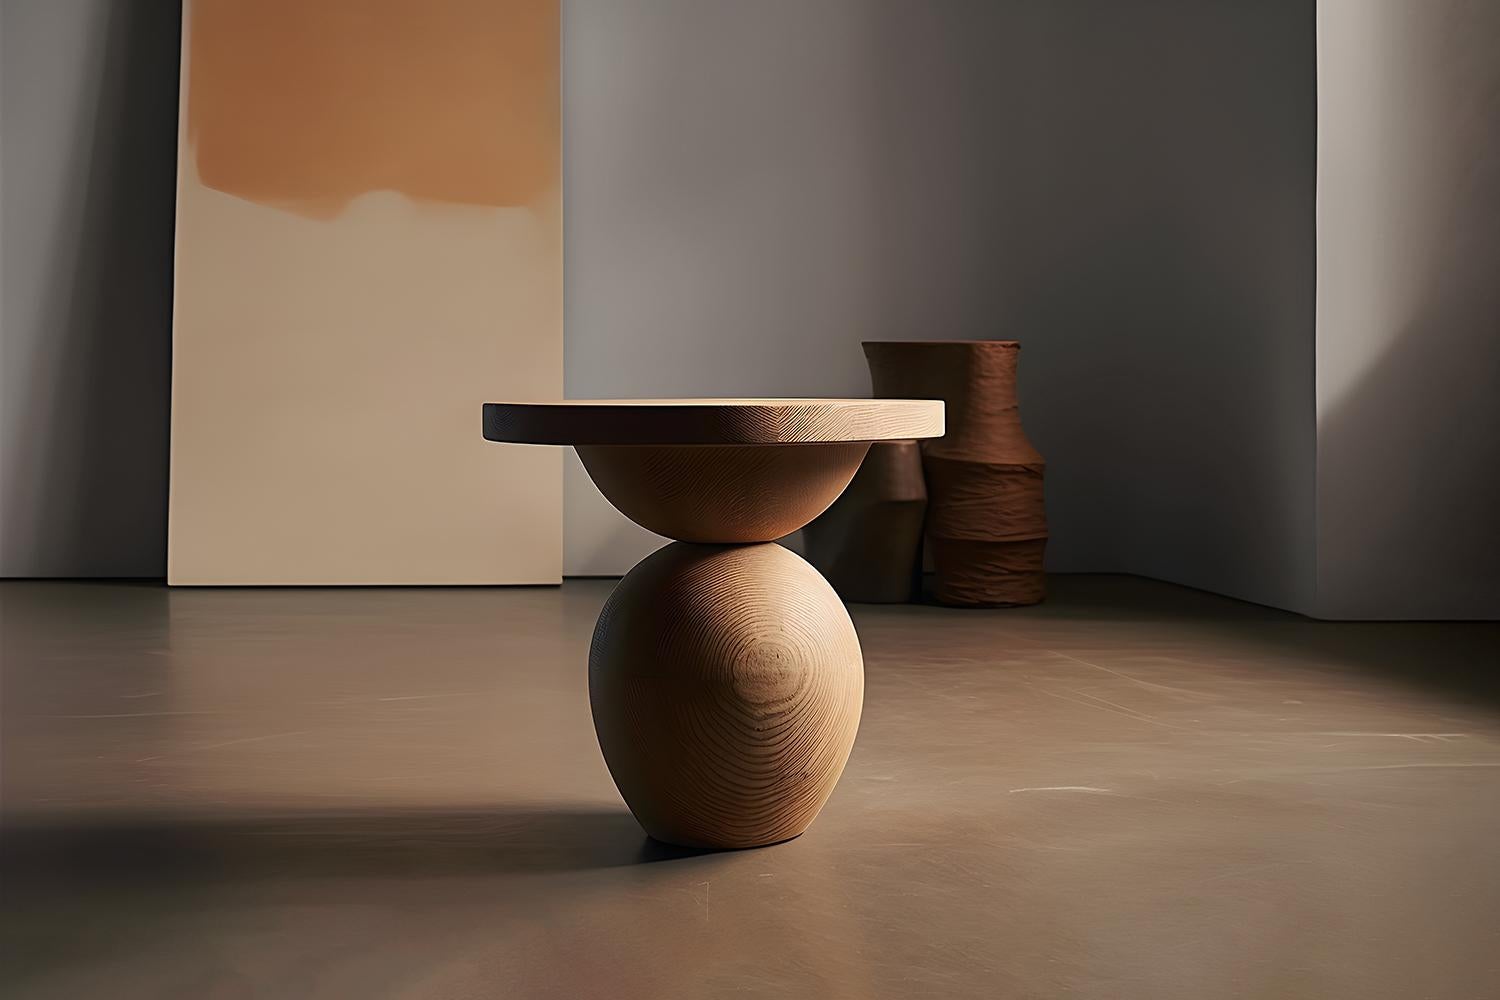 Socle side table, auxiliary table, nightstand

Socle is a small solid wood table designed by the NONO design team. Made of solid wood, its elaborated construction serves as a support, much like a plinth for a statue or sculpture.

In the past,